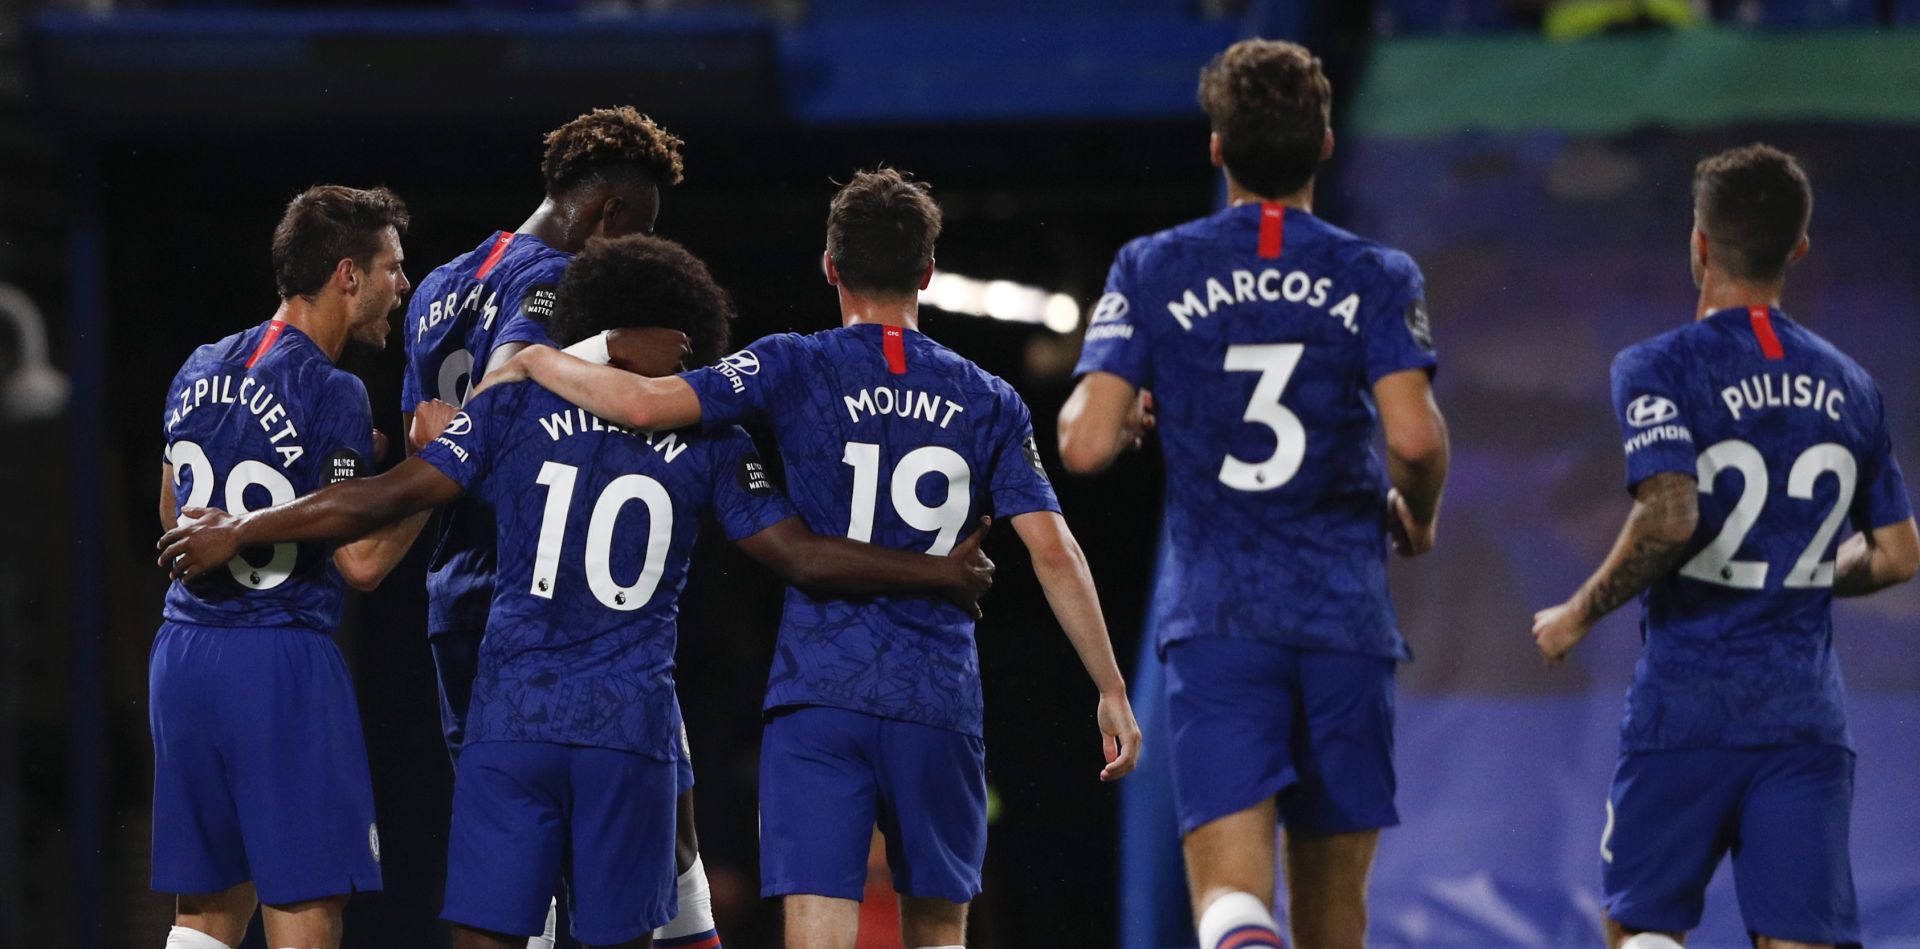 epa08509577 Willian (3-L) of Chelsea celebrates with teammates after scoring the 2-1 lead from the penalty spot during the English Premier League soccer match between Chelsea FC and Manchester City in London, Britain, 25 June 2020.  EPA/Adrian Dennis/NMC/AFP Pool EDITORIAL USE ONLY. No use with unauthorized audio, video, data, fixture lists, club/league logos or 'live' services. Online in-match use limited to 120 images, no video emulation. No use in betting, games or single club/league/player publications.